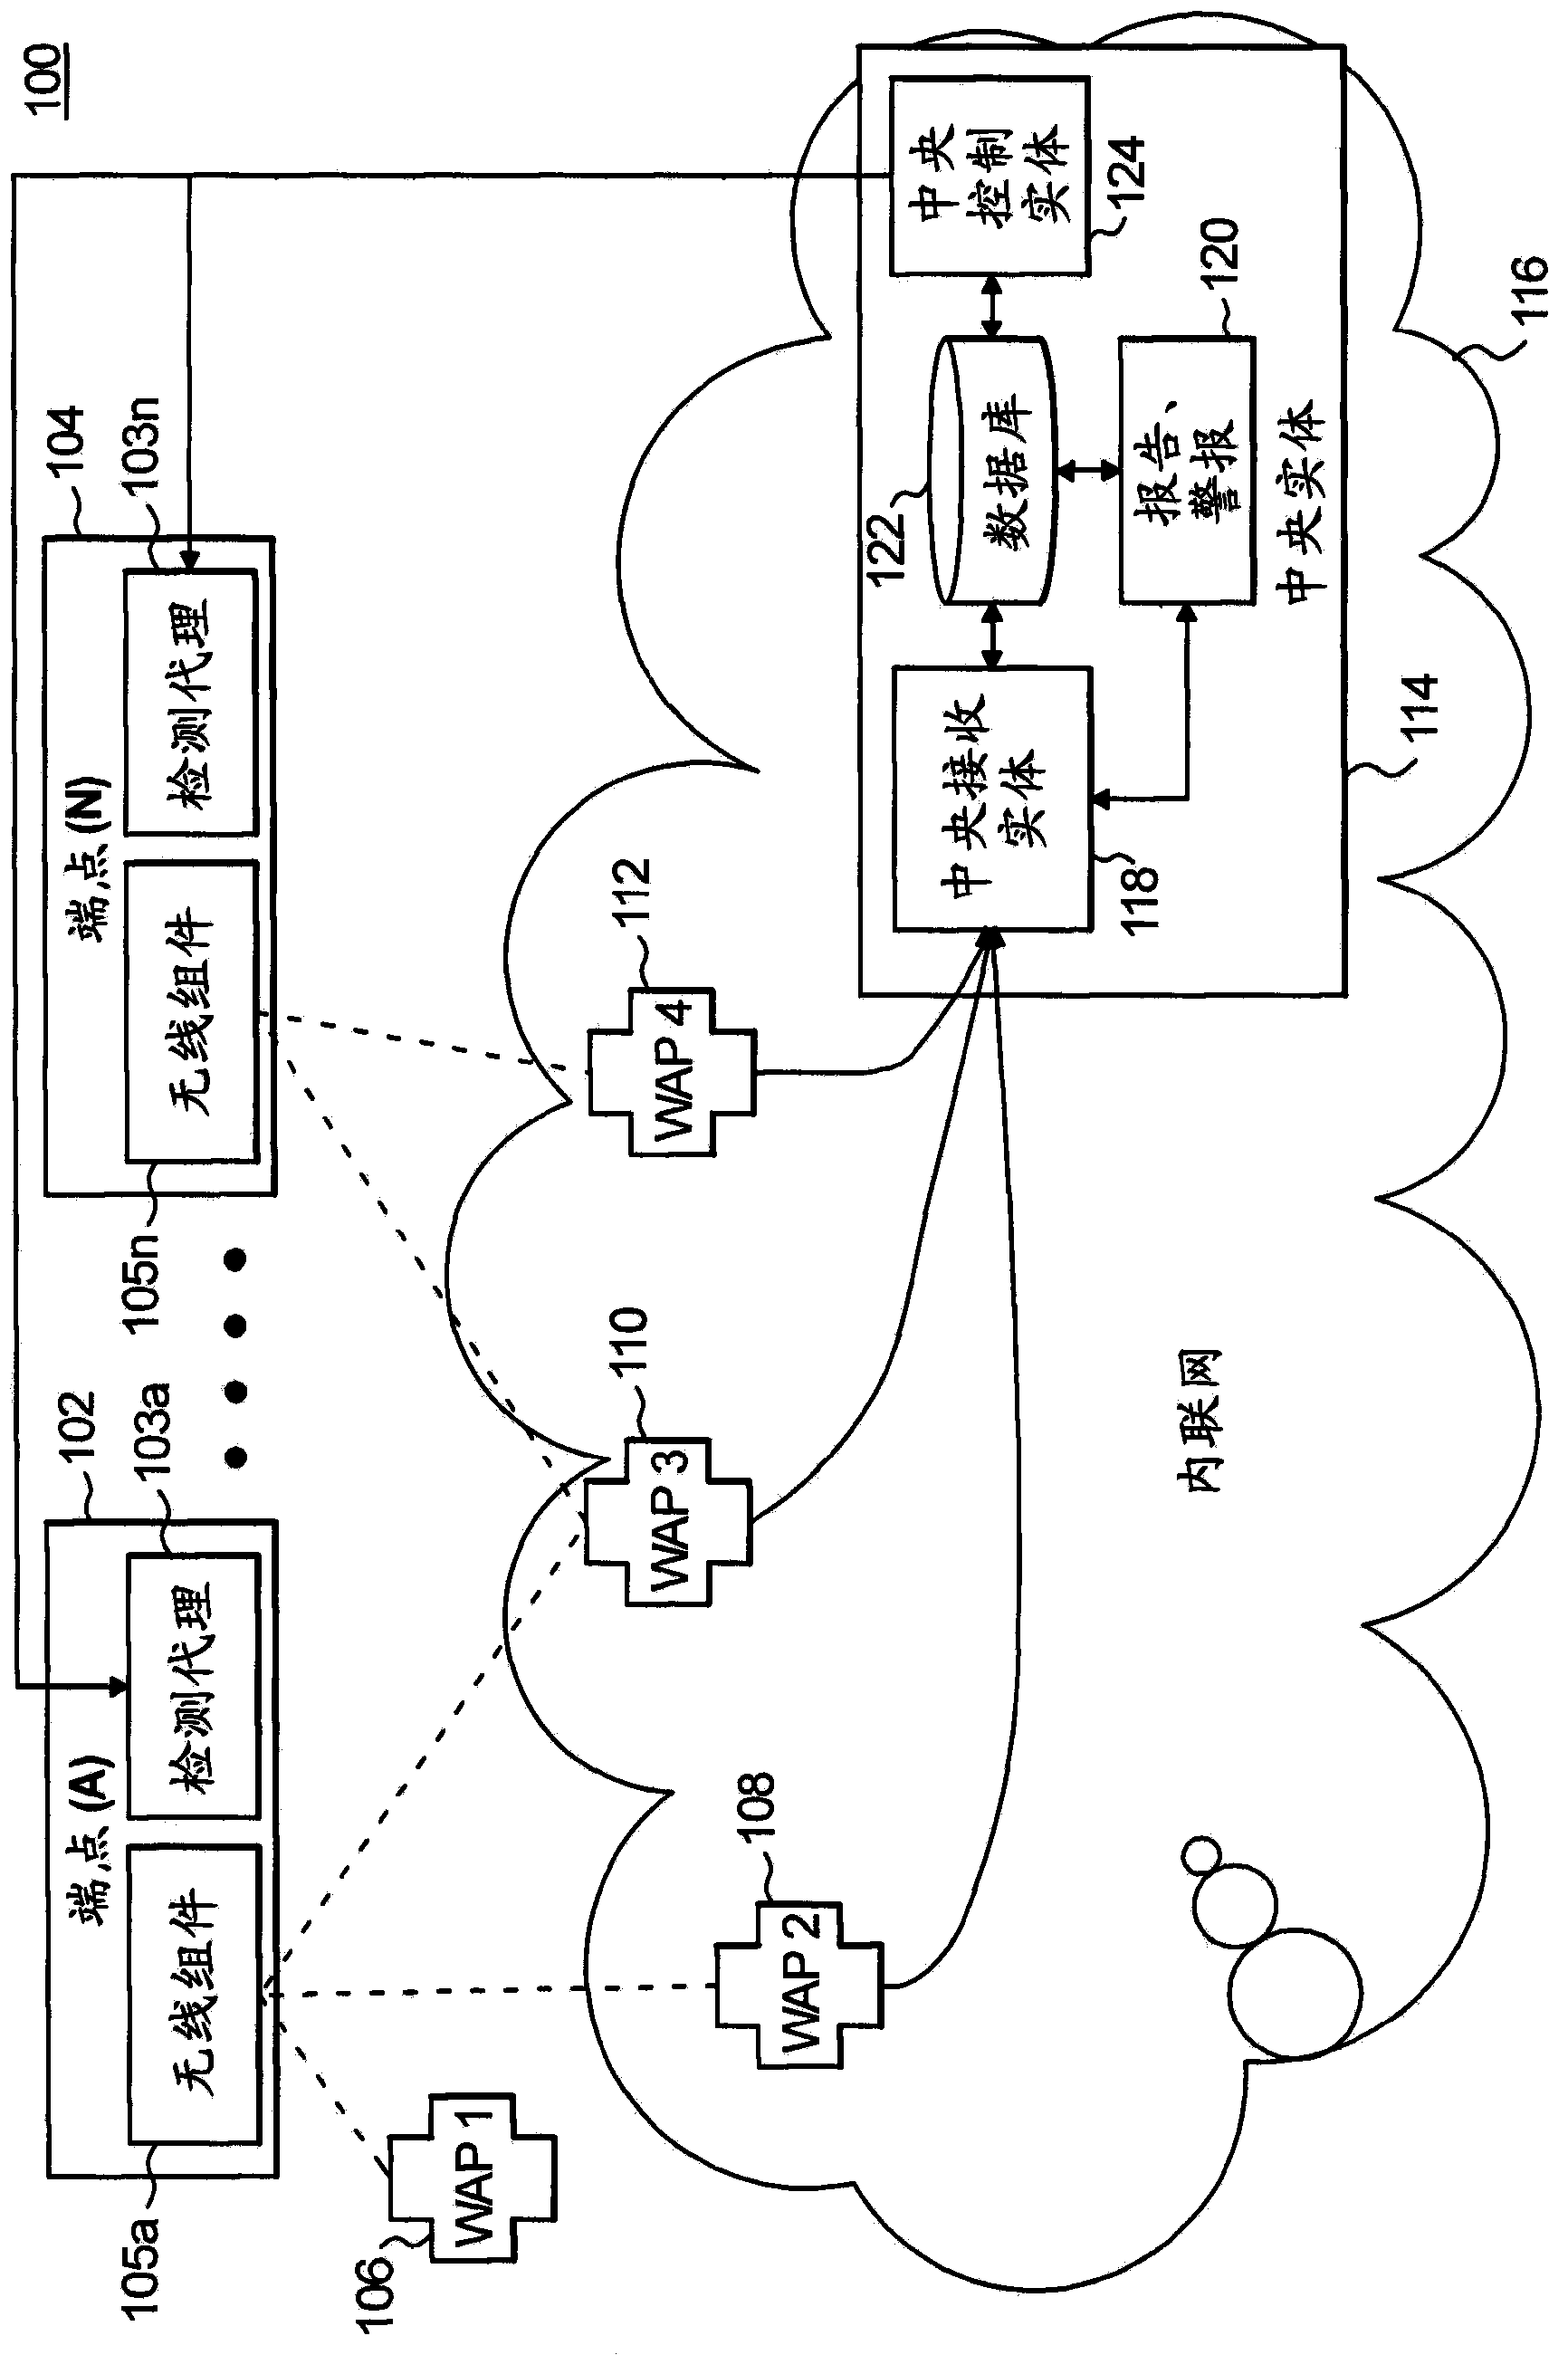 System and method for identifying unauthorized or misconfigured wireless access point